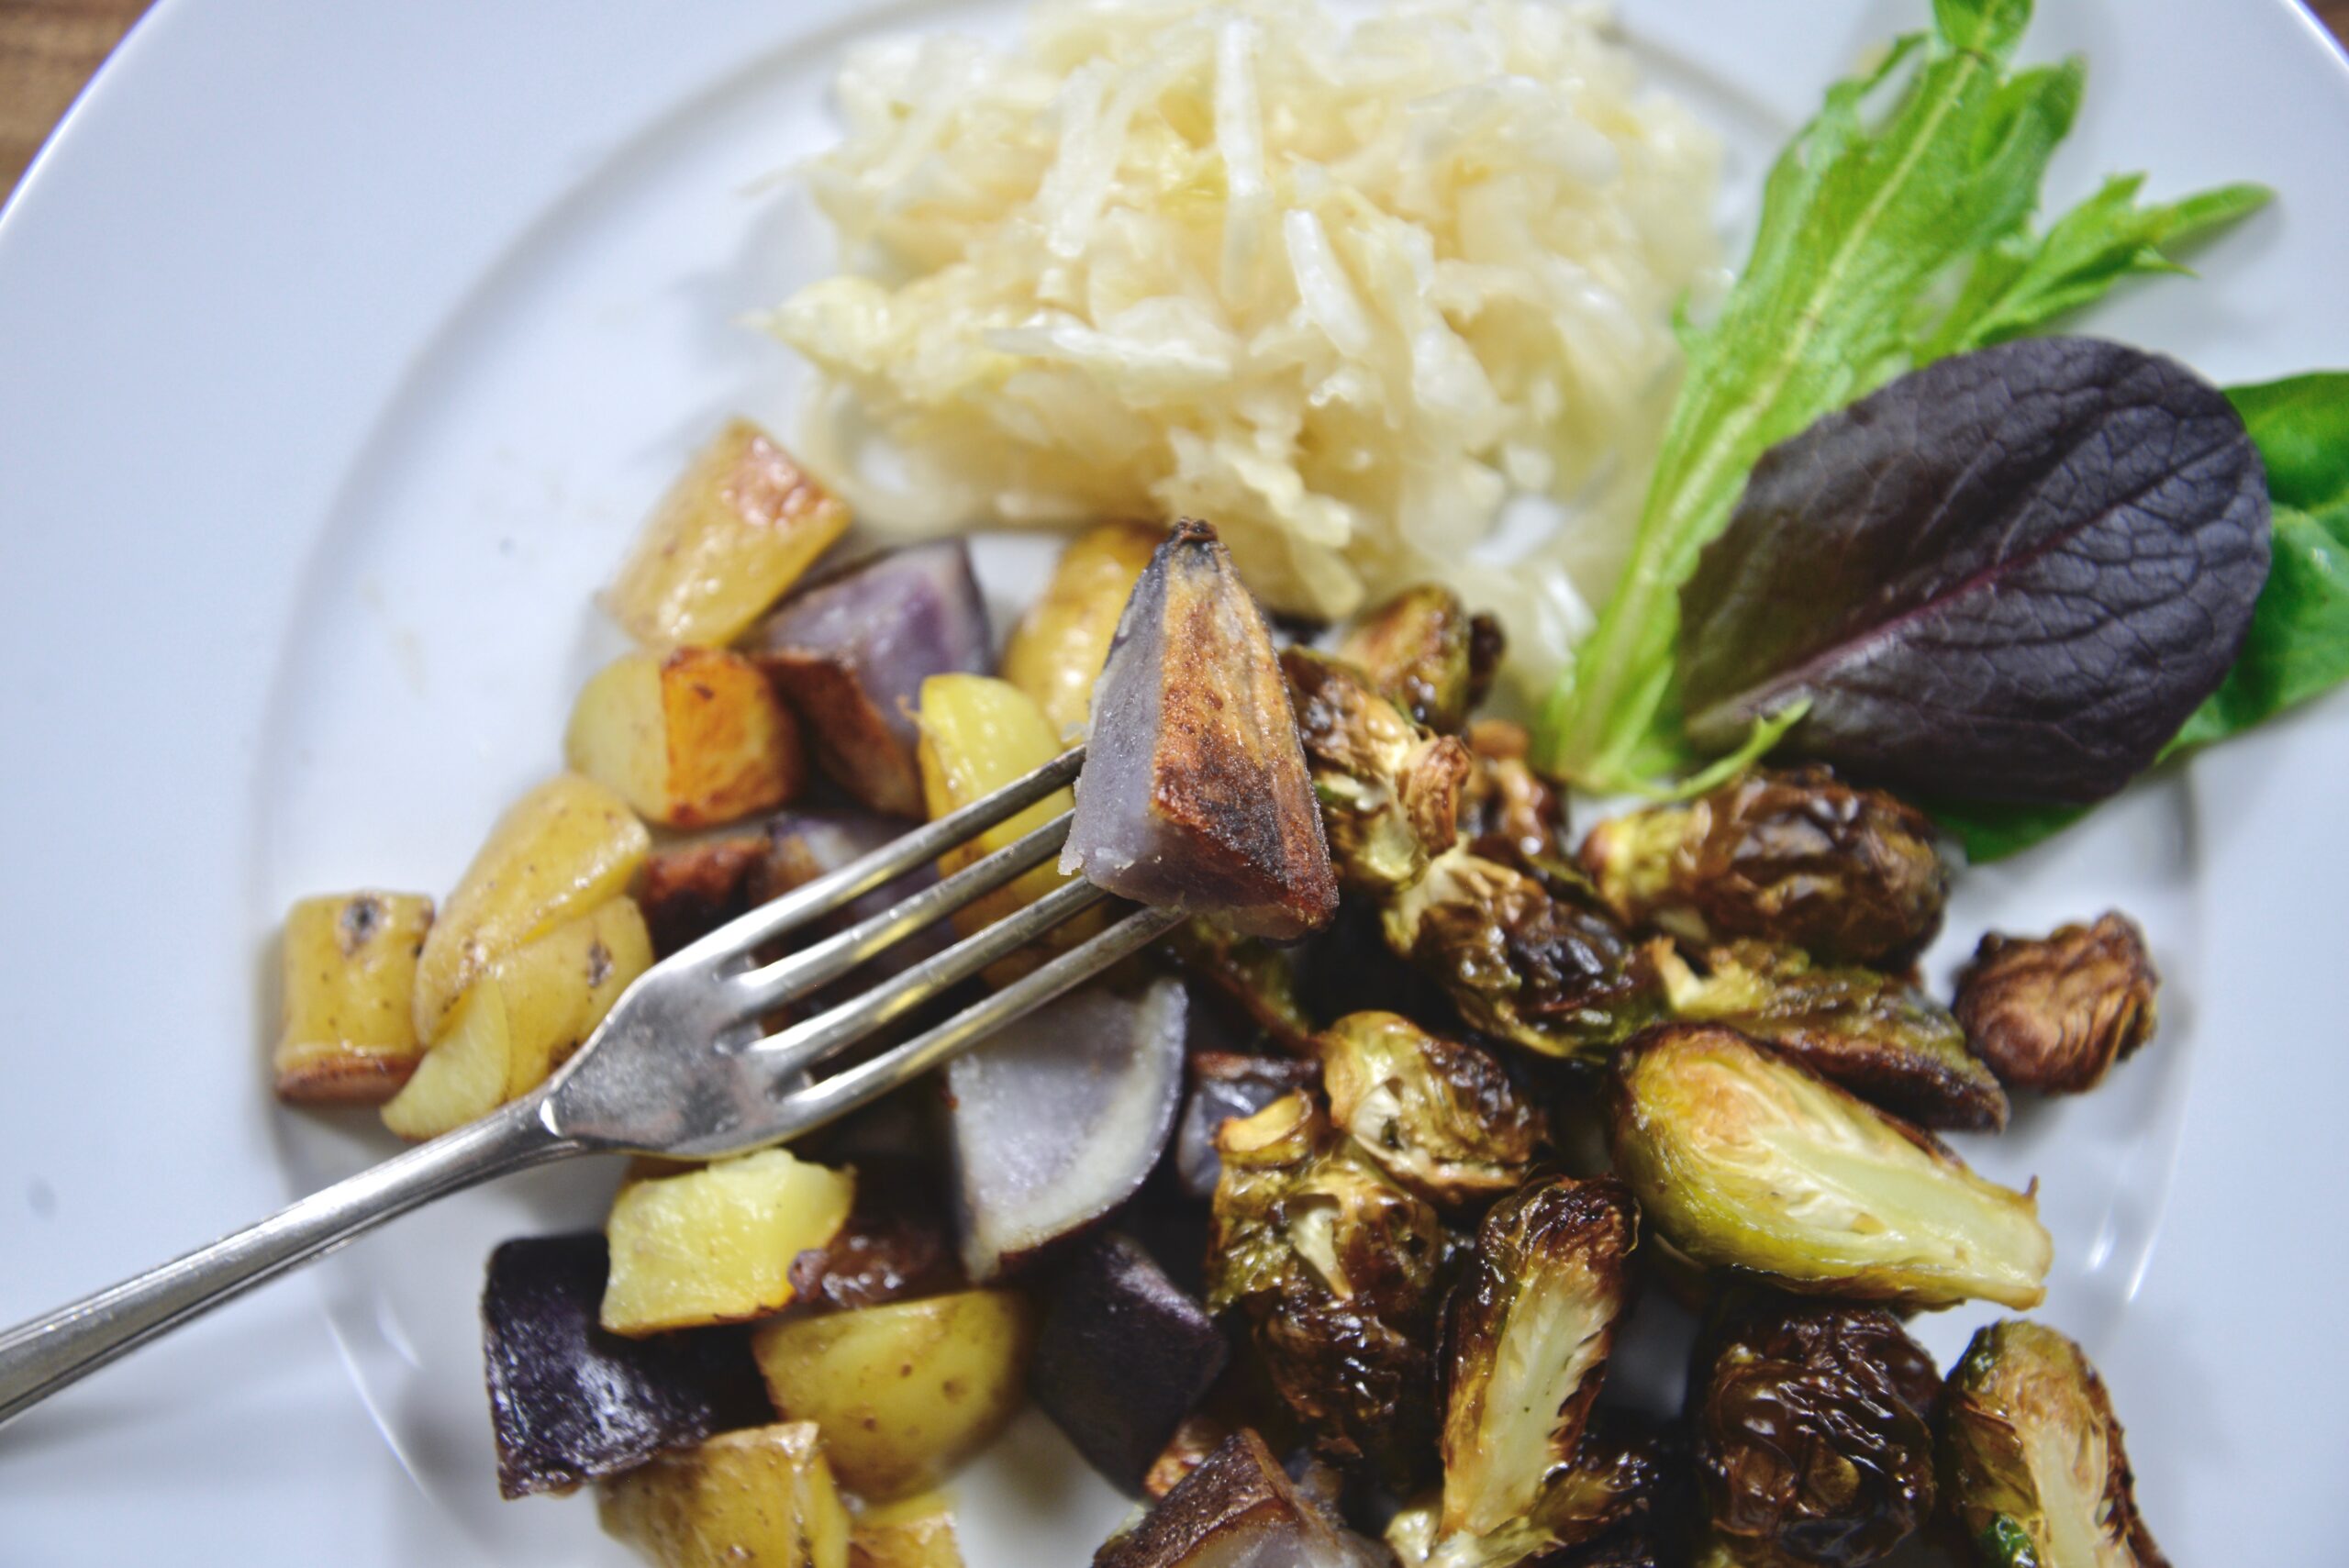 camel hump fat fried skillet potatoes and roasted brussel sprouts